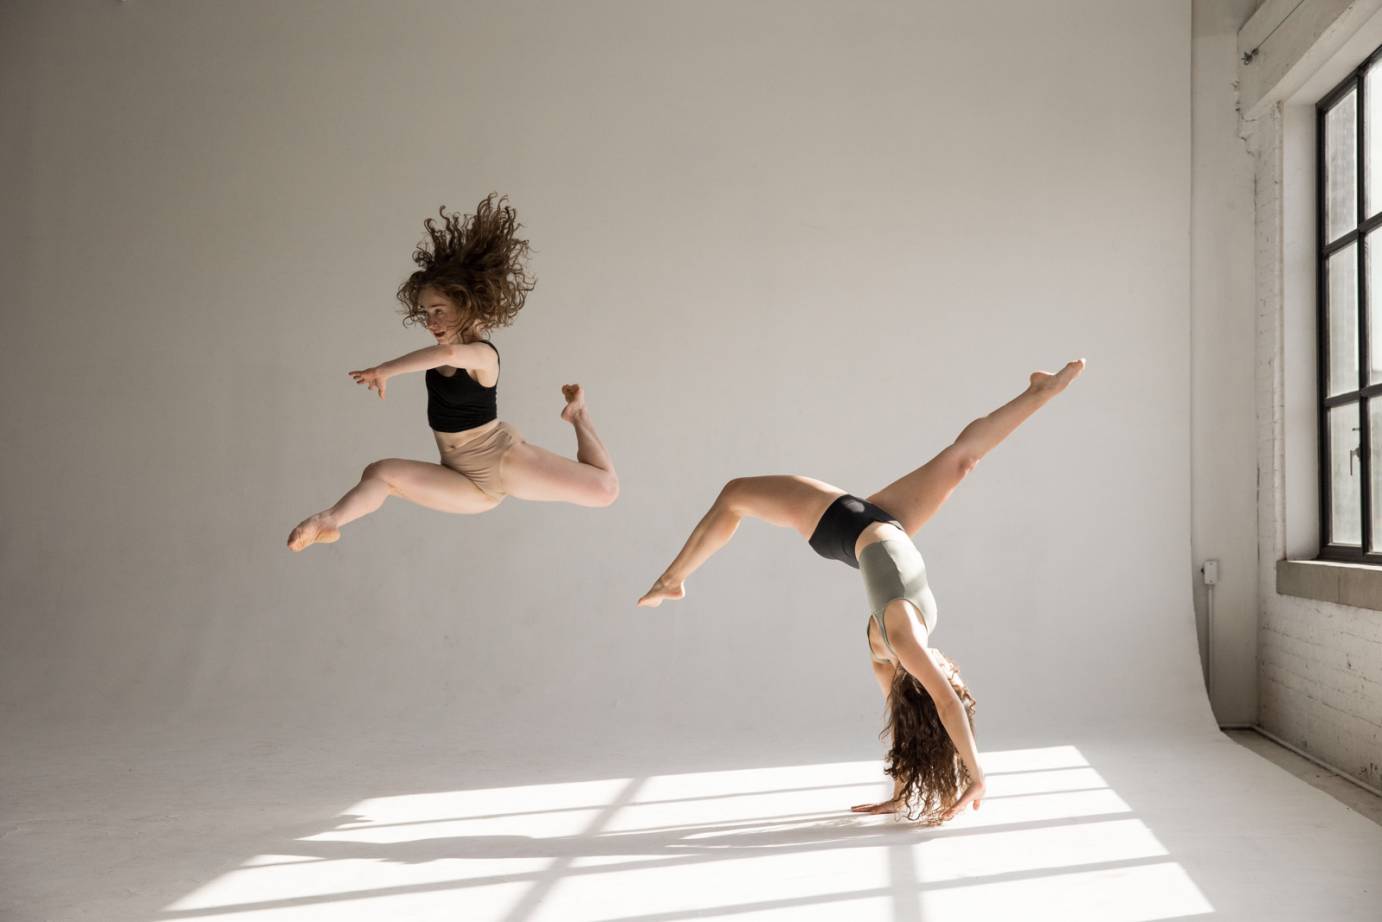 two women in midriff tops and beige briefs dance in a room against a white back drop... one is caught in mid-air her red curls flying above her, the other is in a handstand with her legs bent, you can feel their energy  